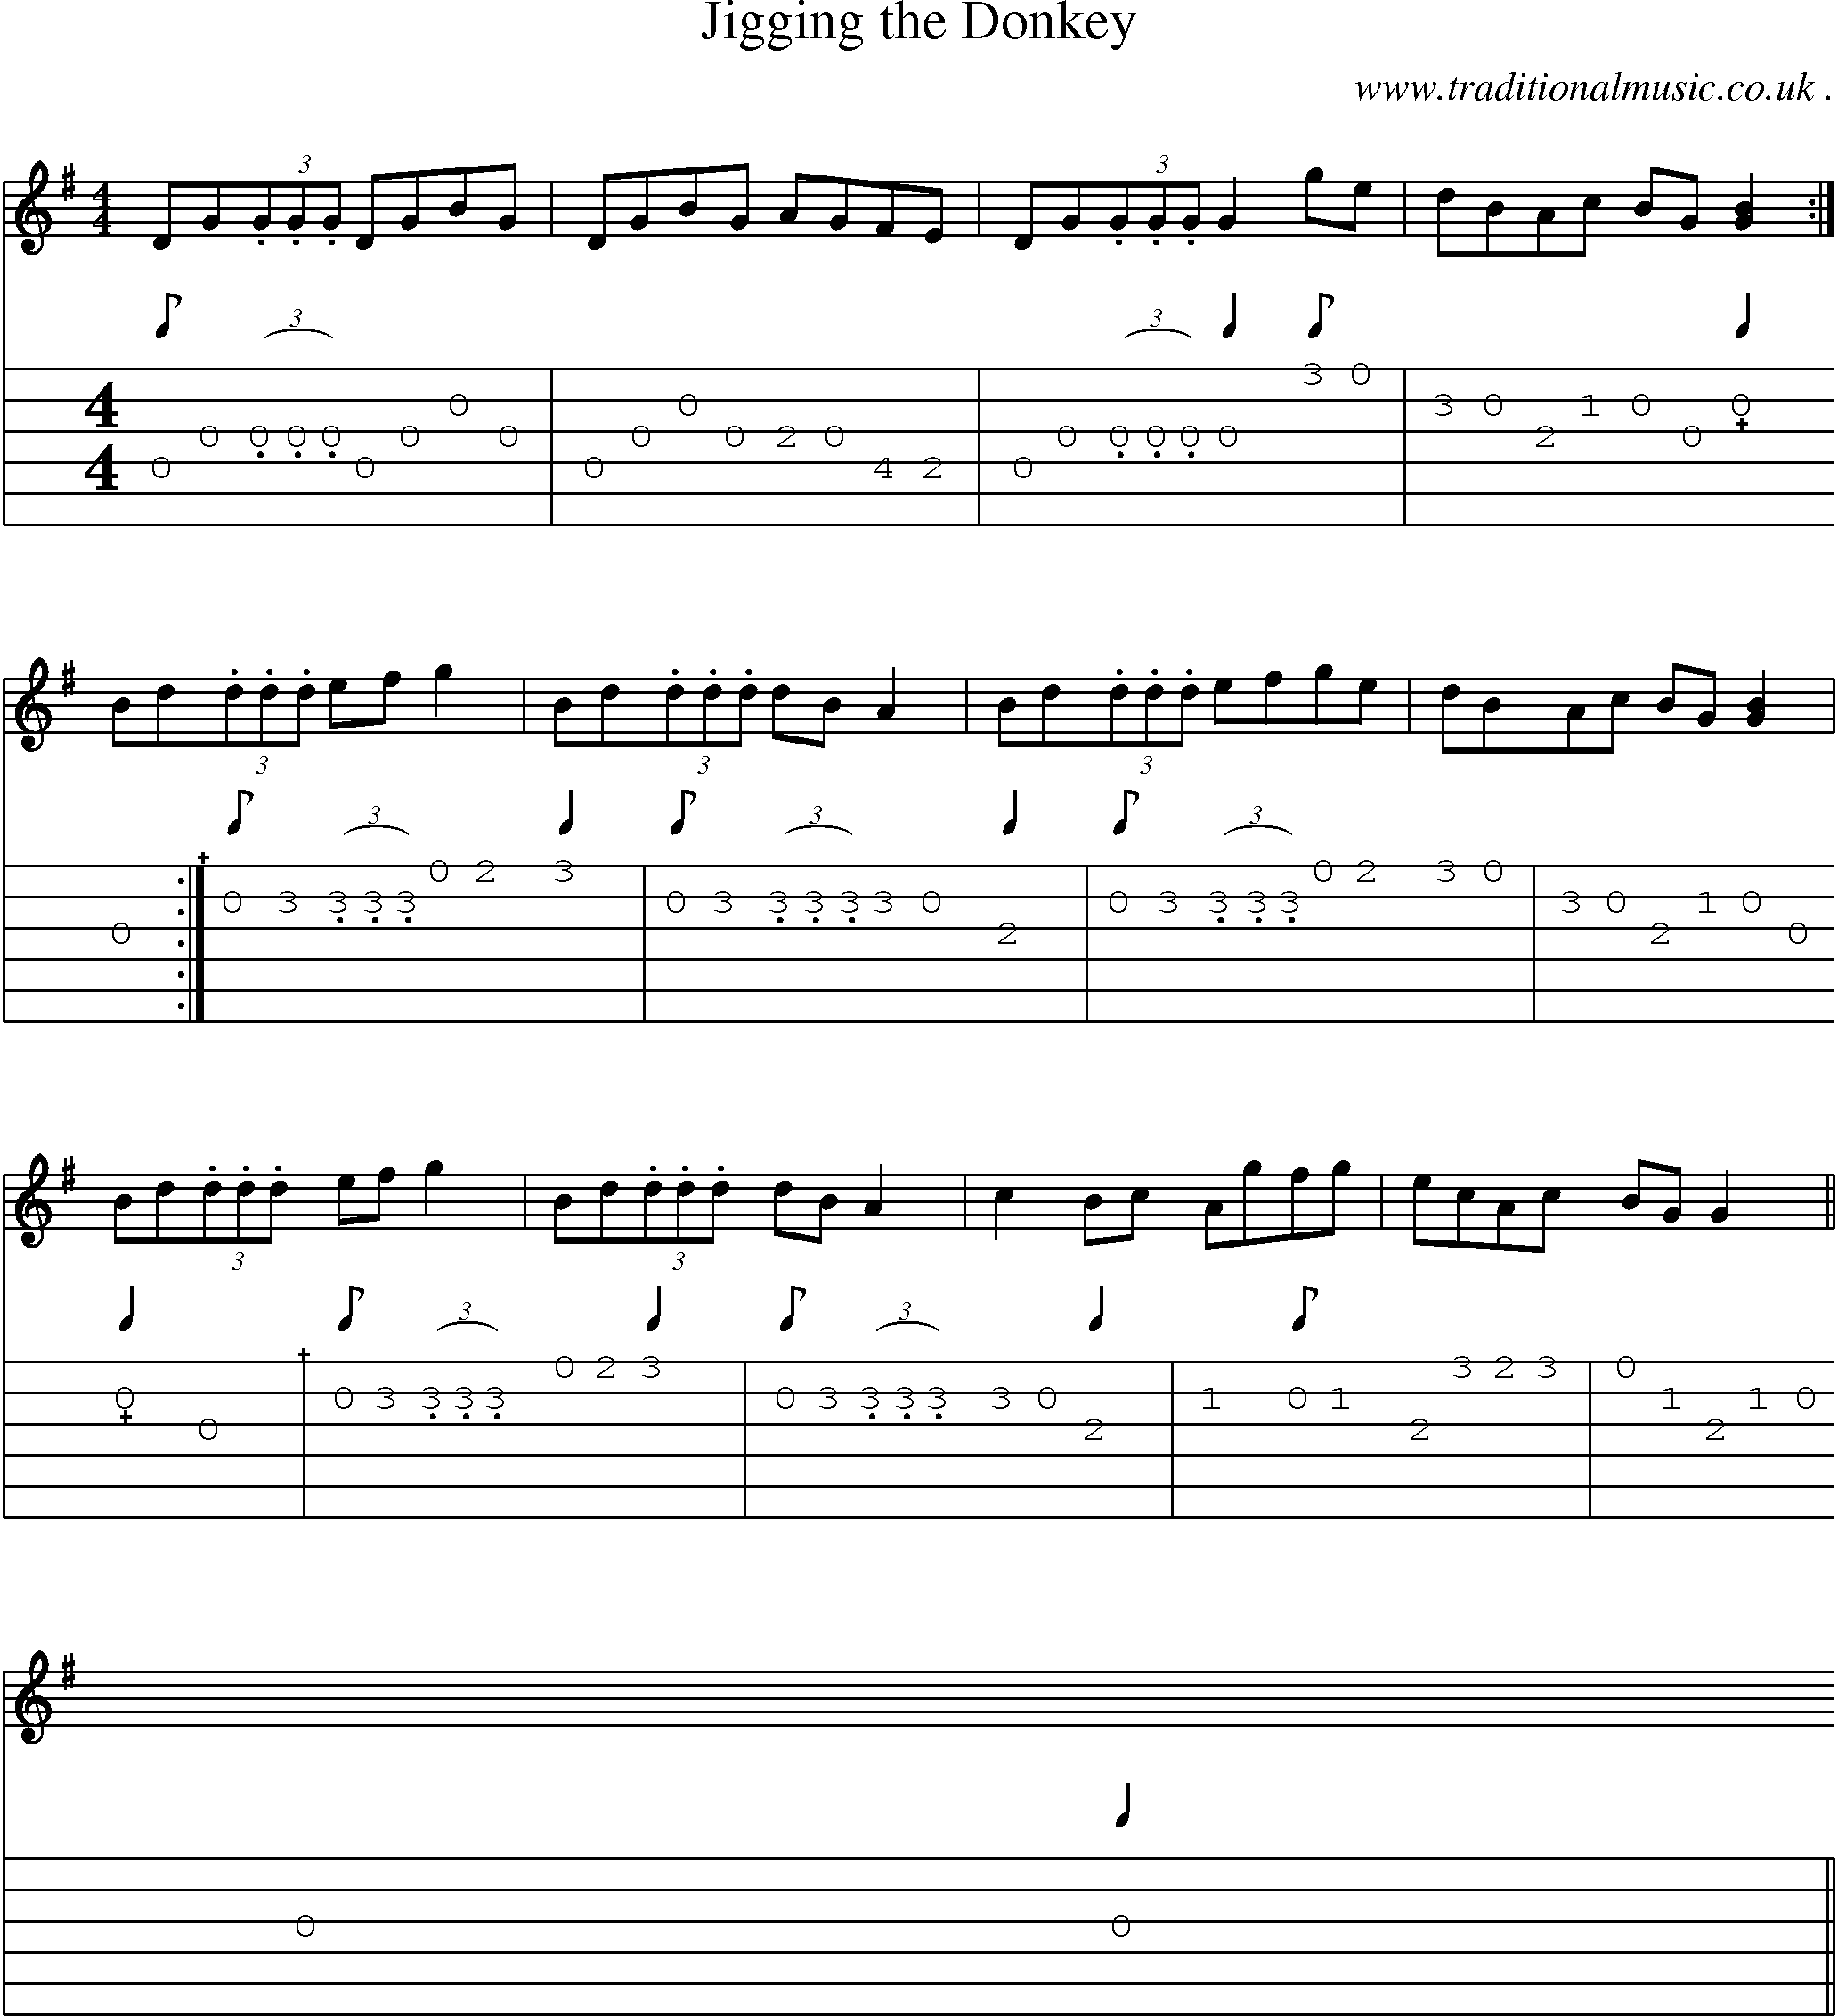 Sheet-Music and Guitar Tabs for Jigging The Donkey